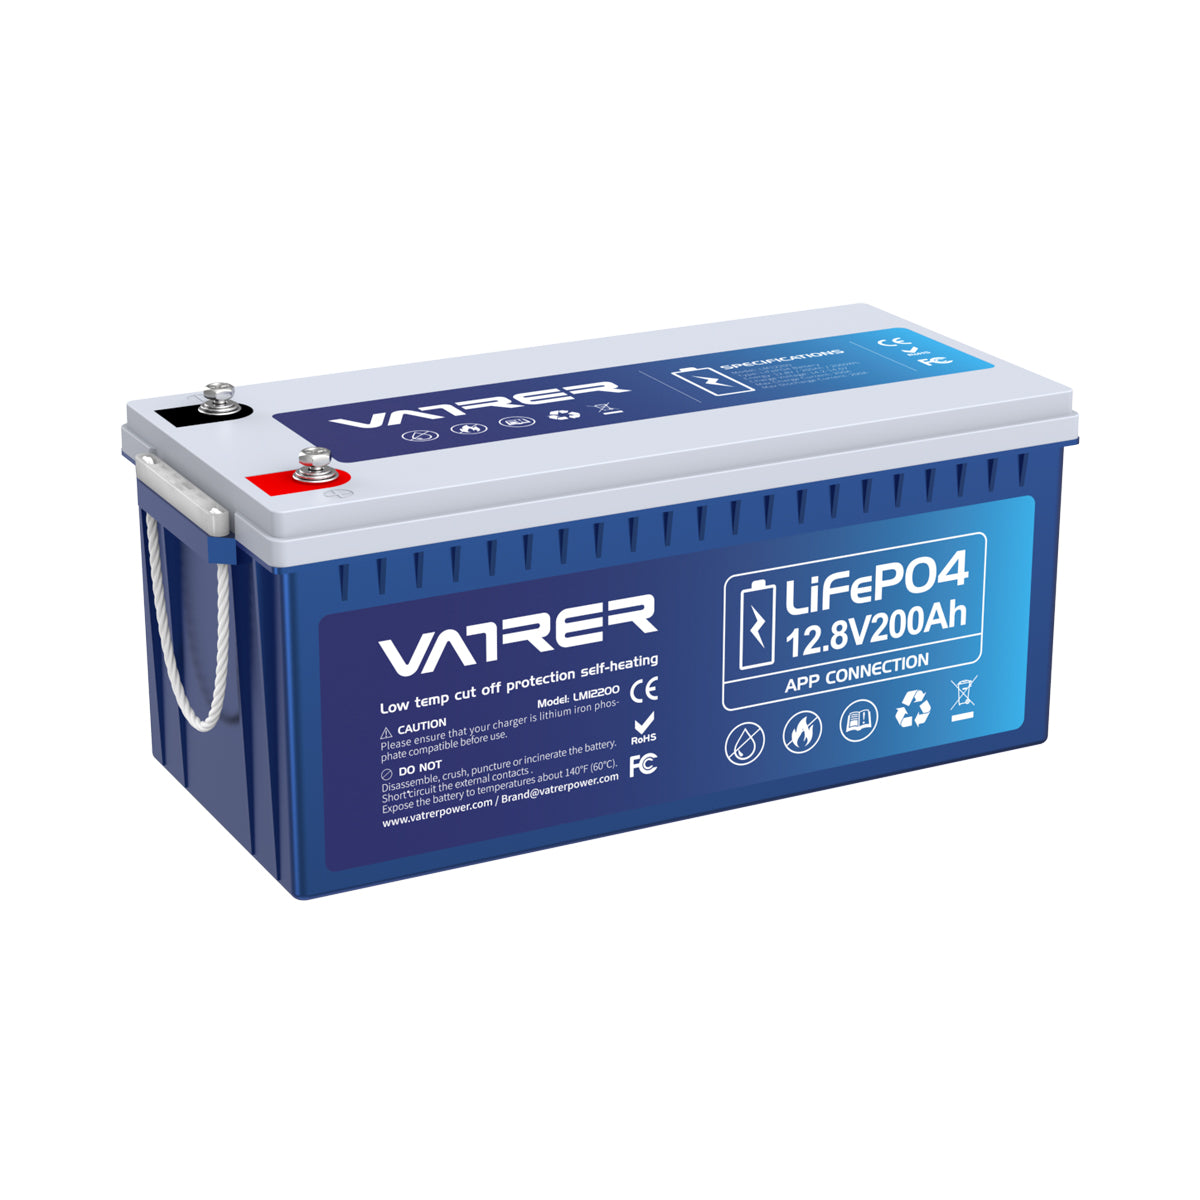 12V 200Ah Lithium Iron LiFePO4 Deep Cycle Battery, Built-in 100A